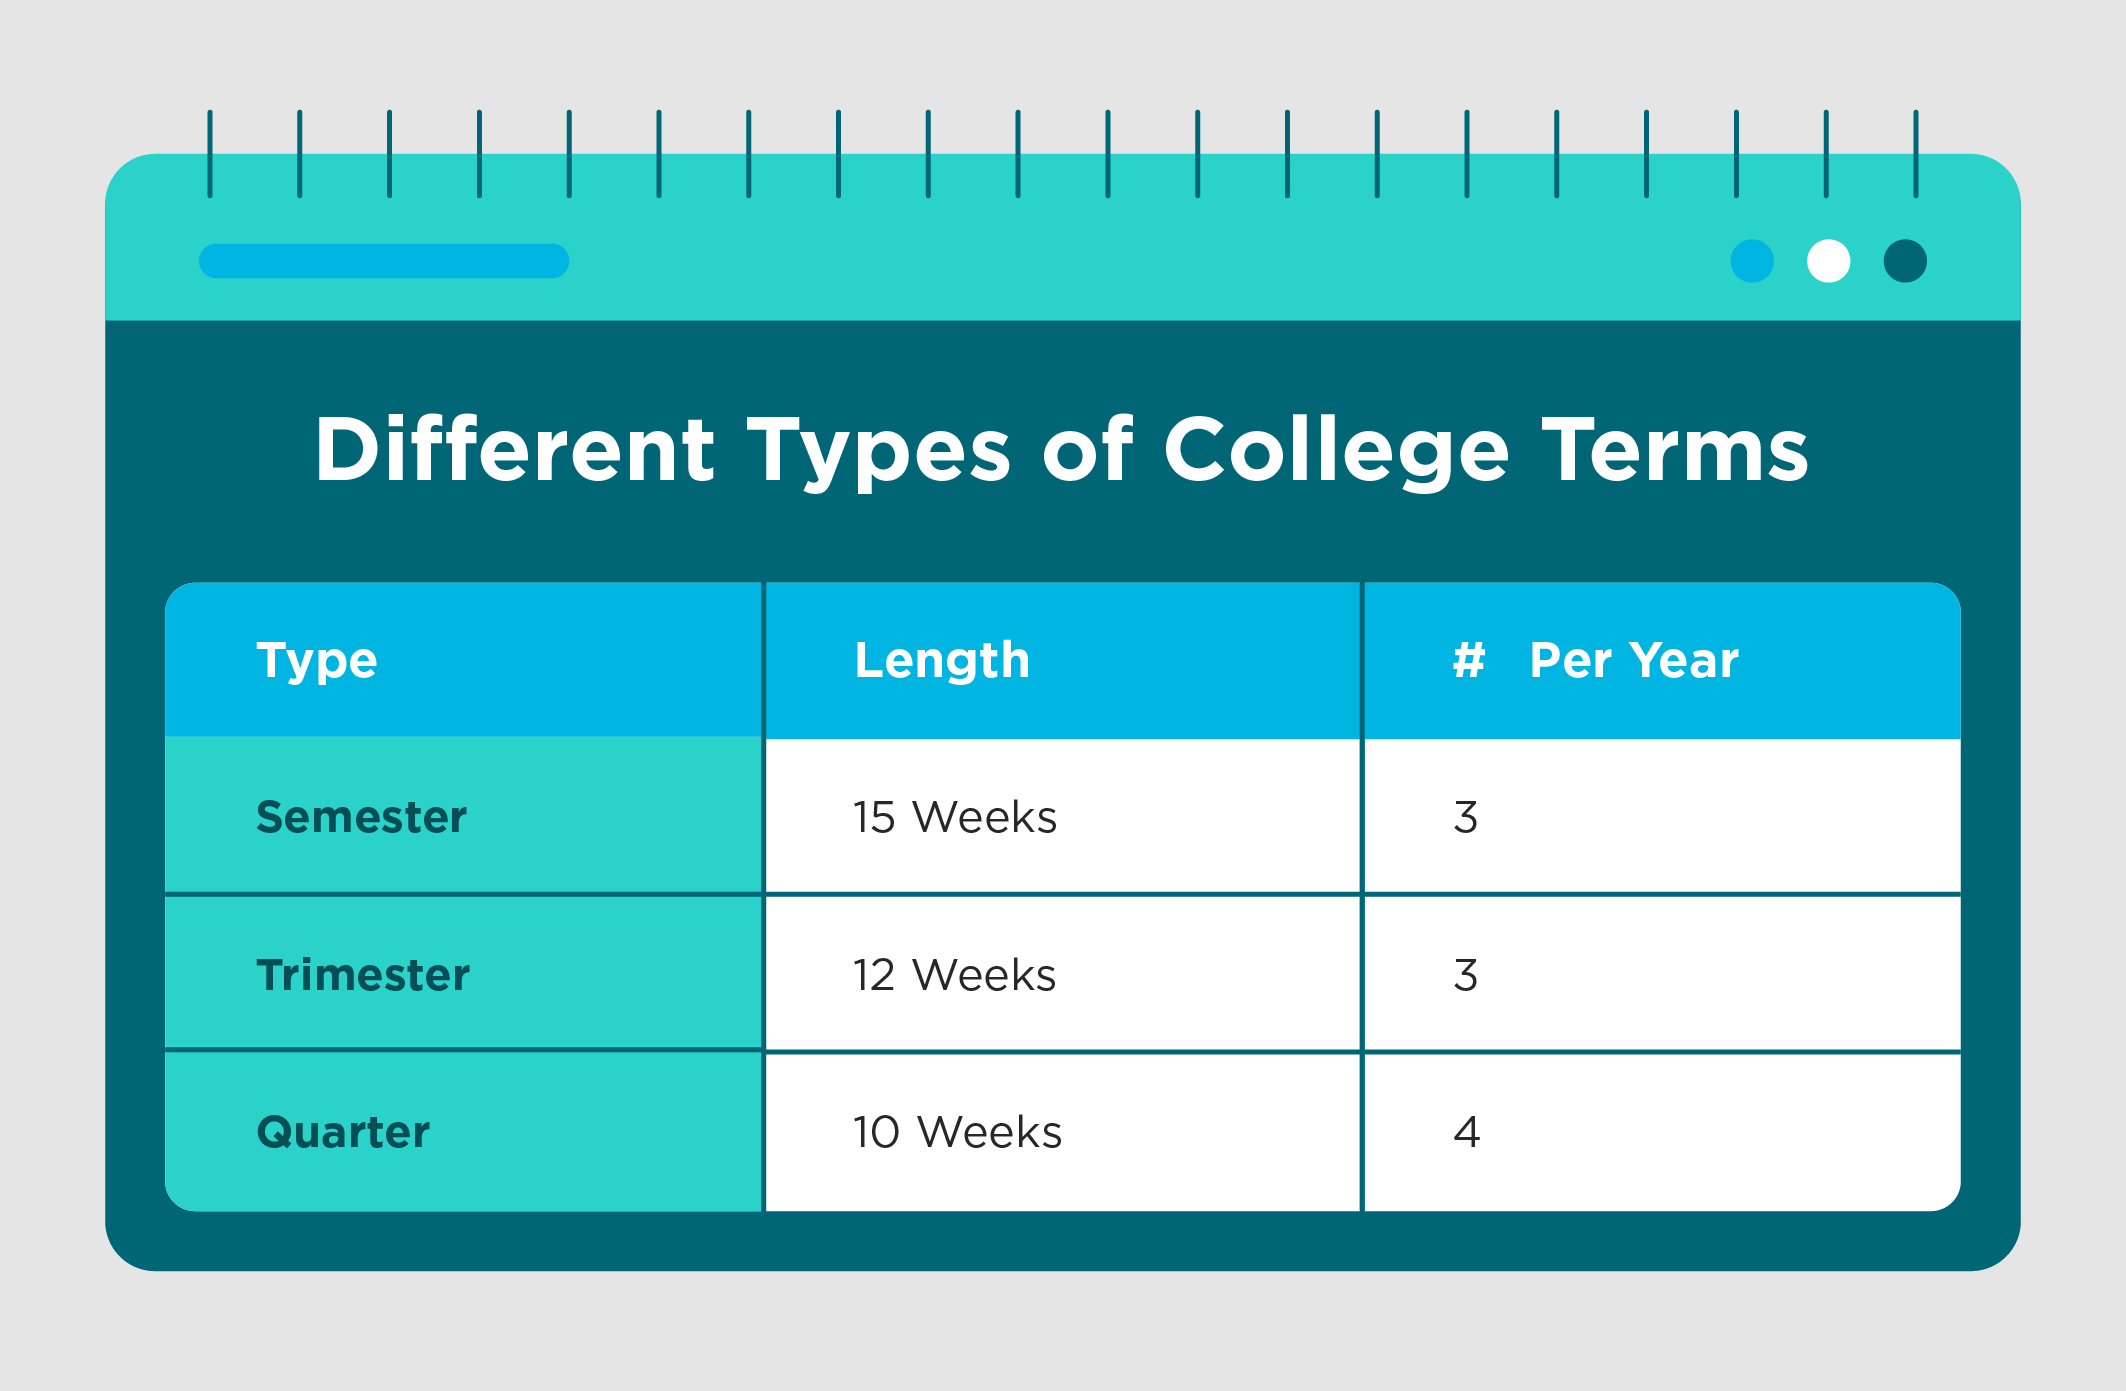 Image depicting the length of different college terms